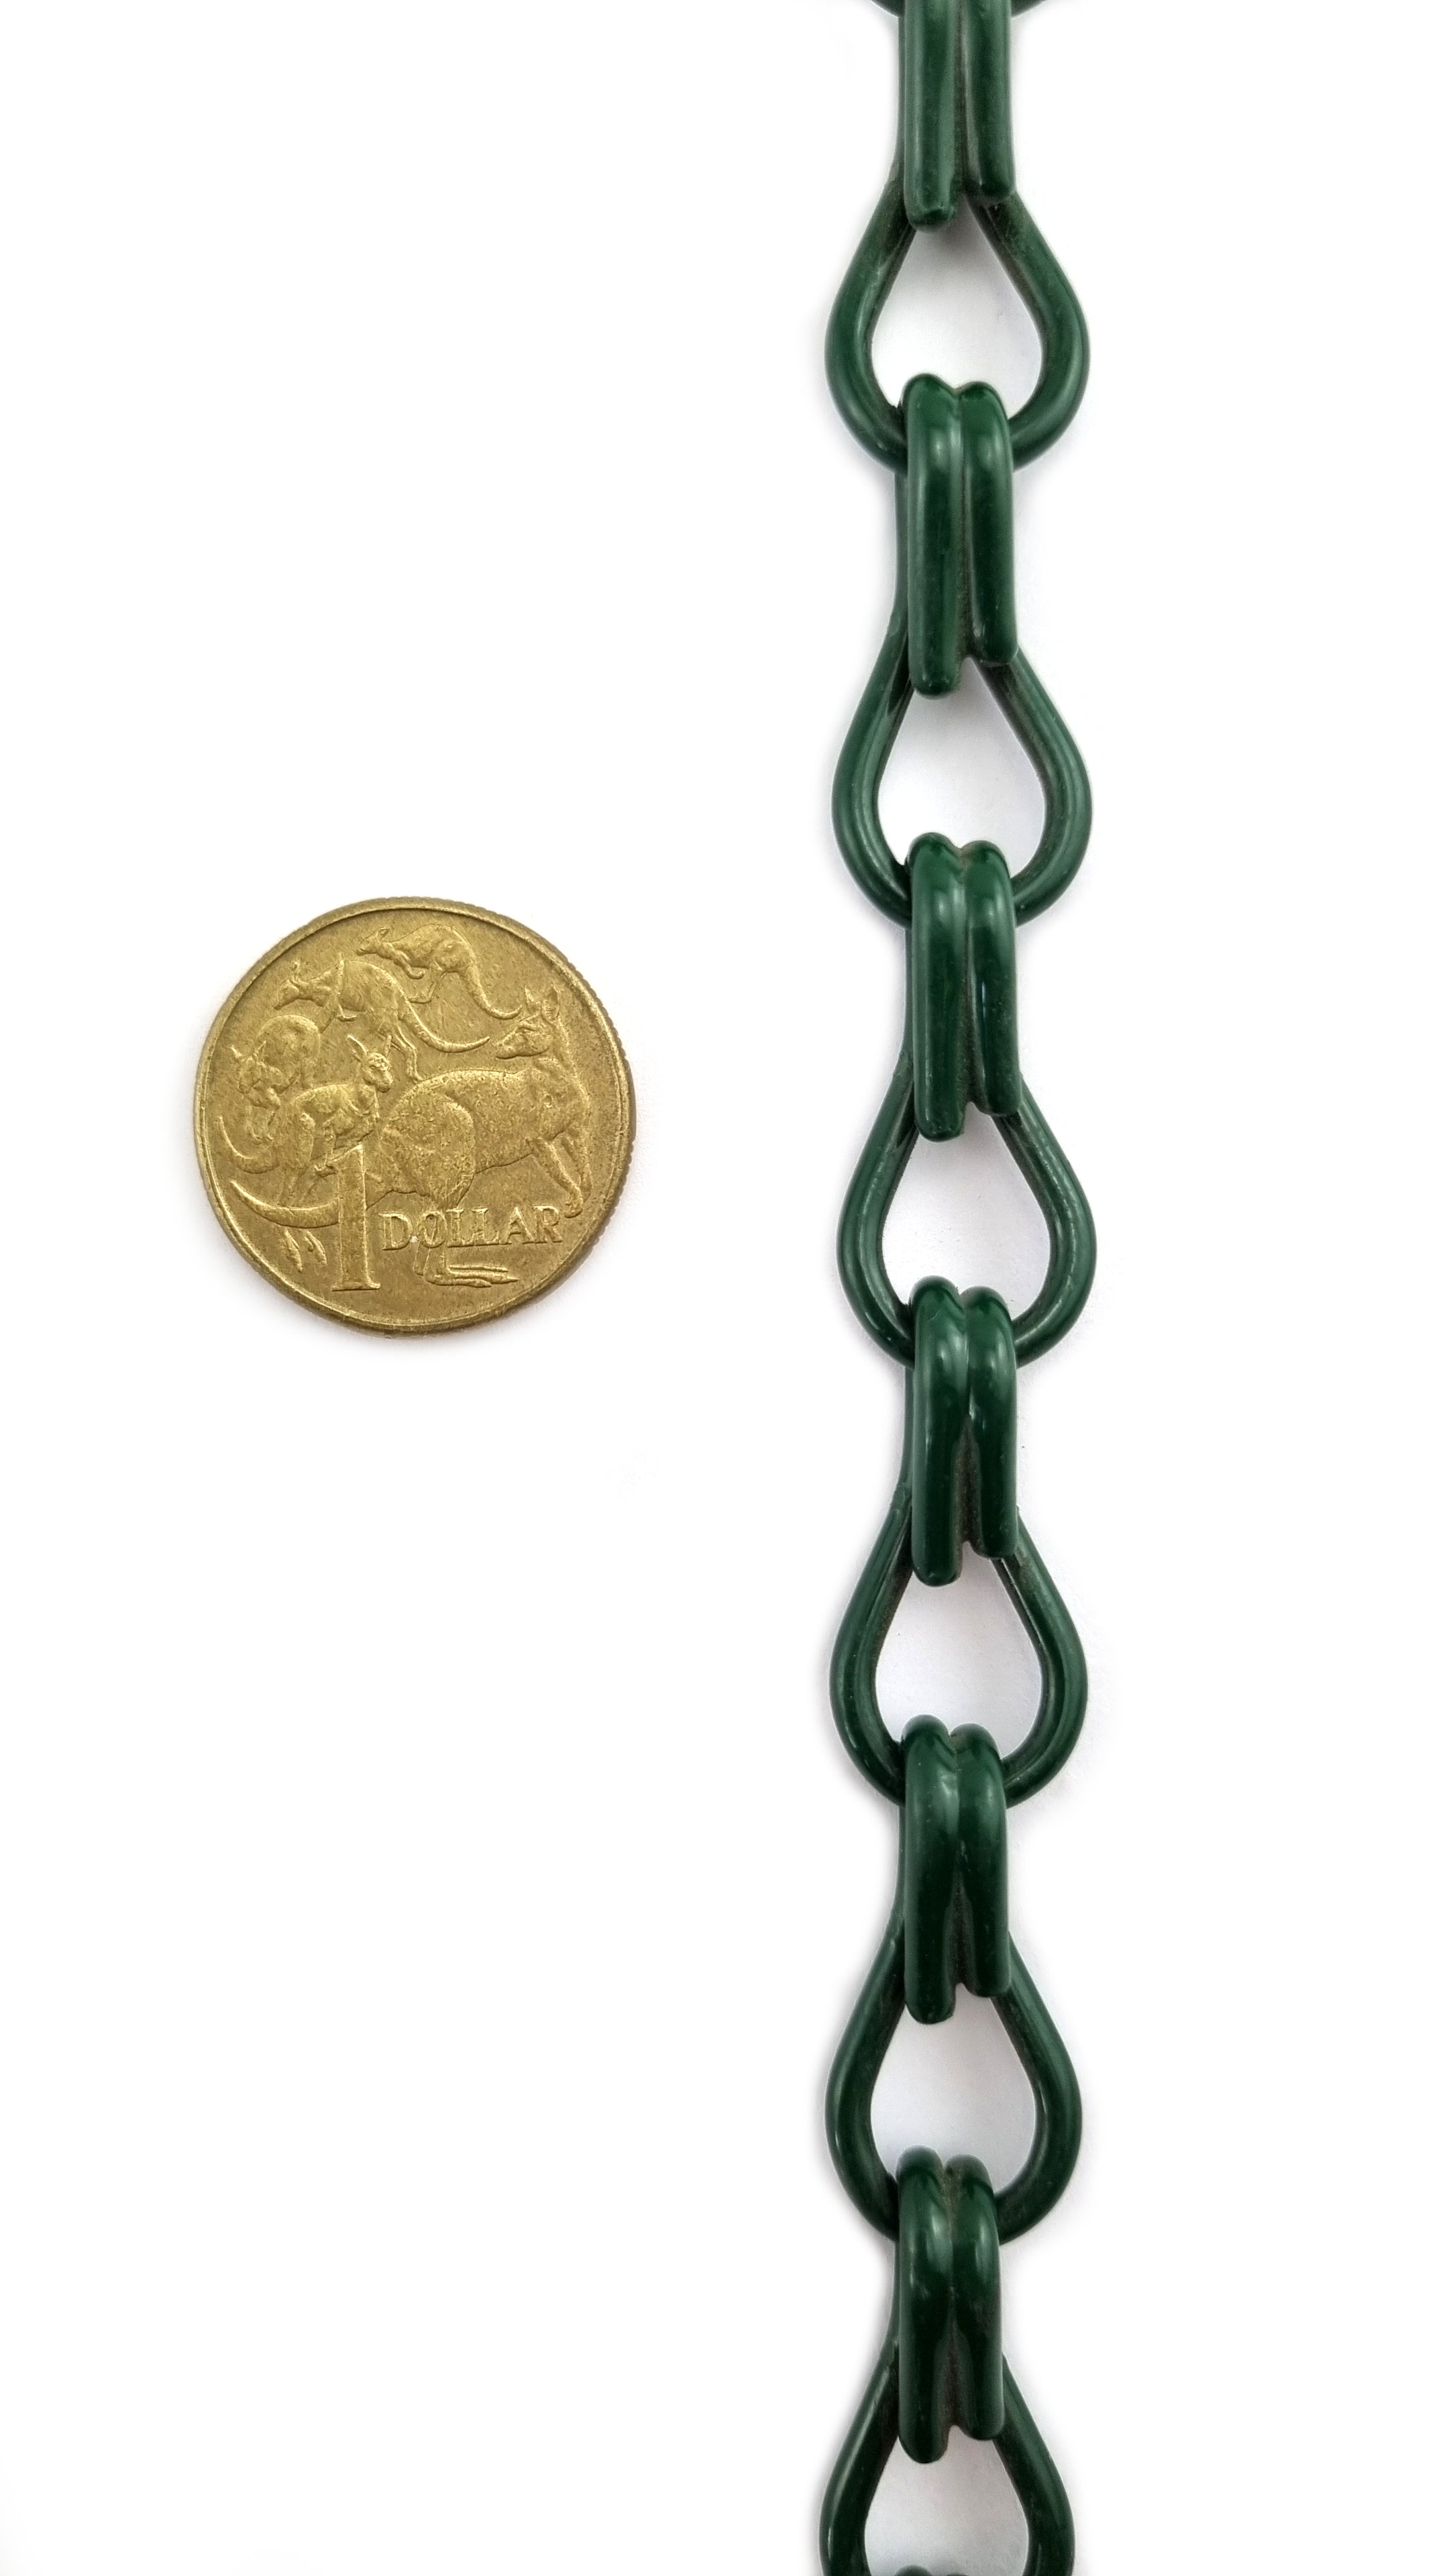 2.5mm Double Jack Chain Green Powder Coated. Australian made. Chain by the metre. Shop hardware online chain.com.au